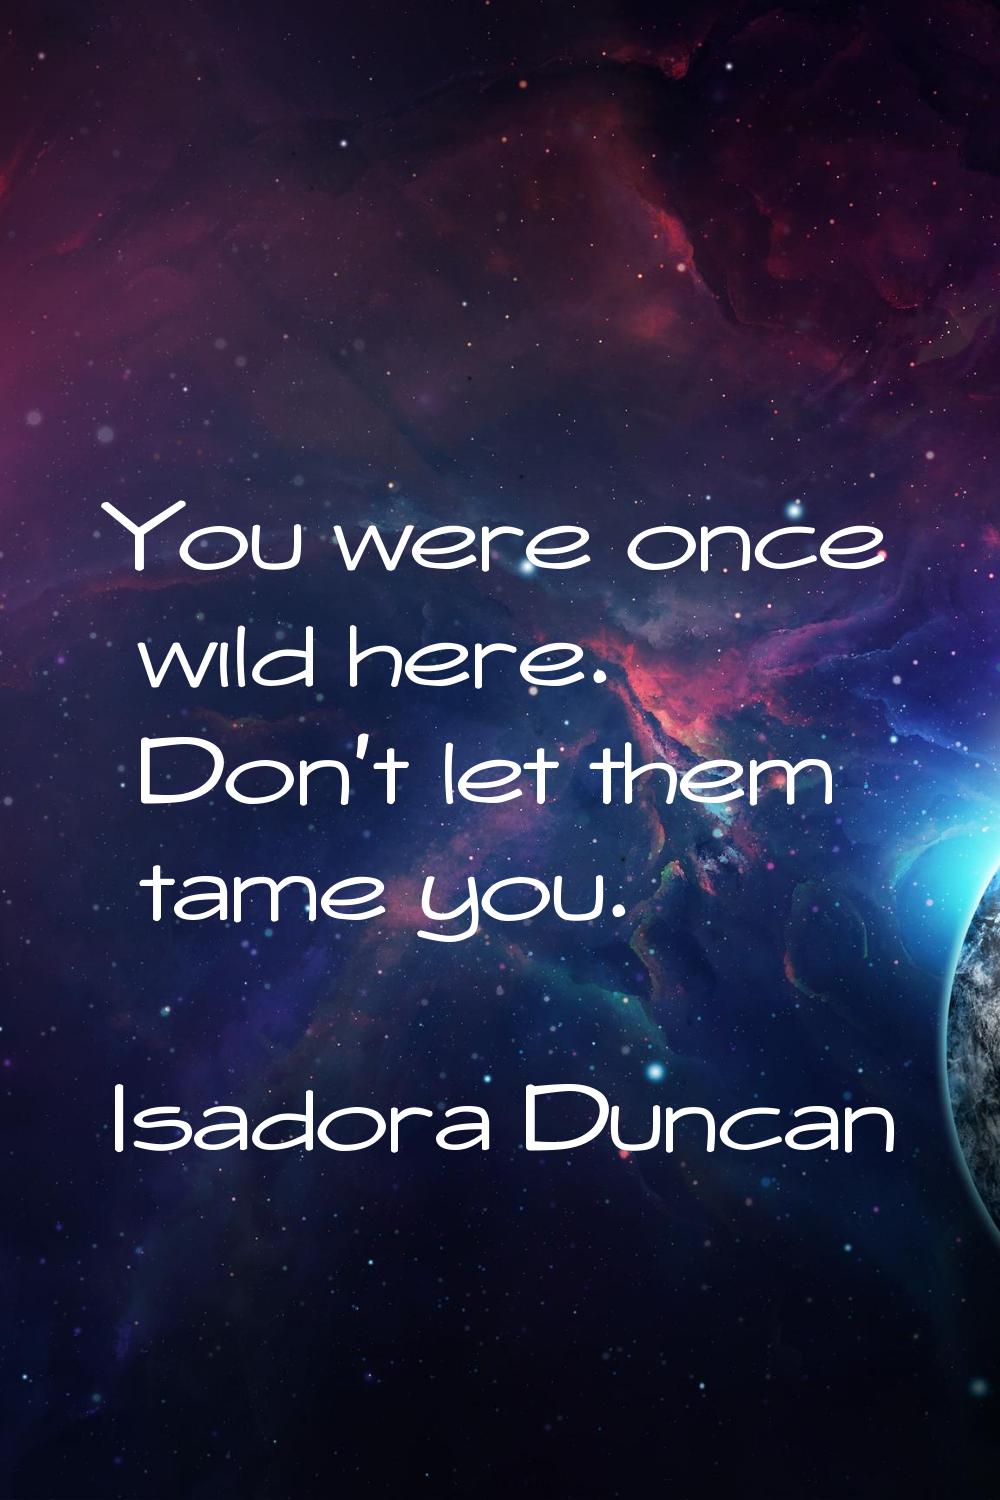 You were once wild here. Don't let them tame you.